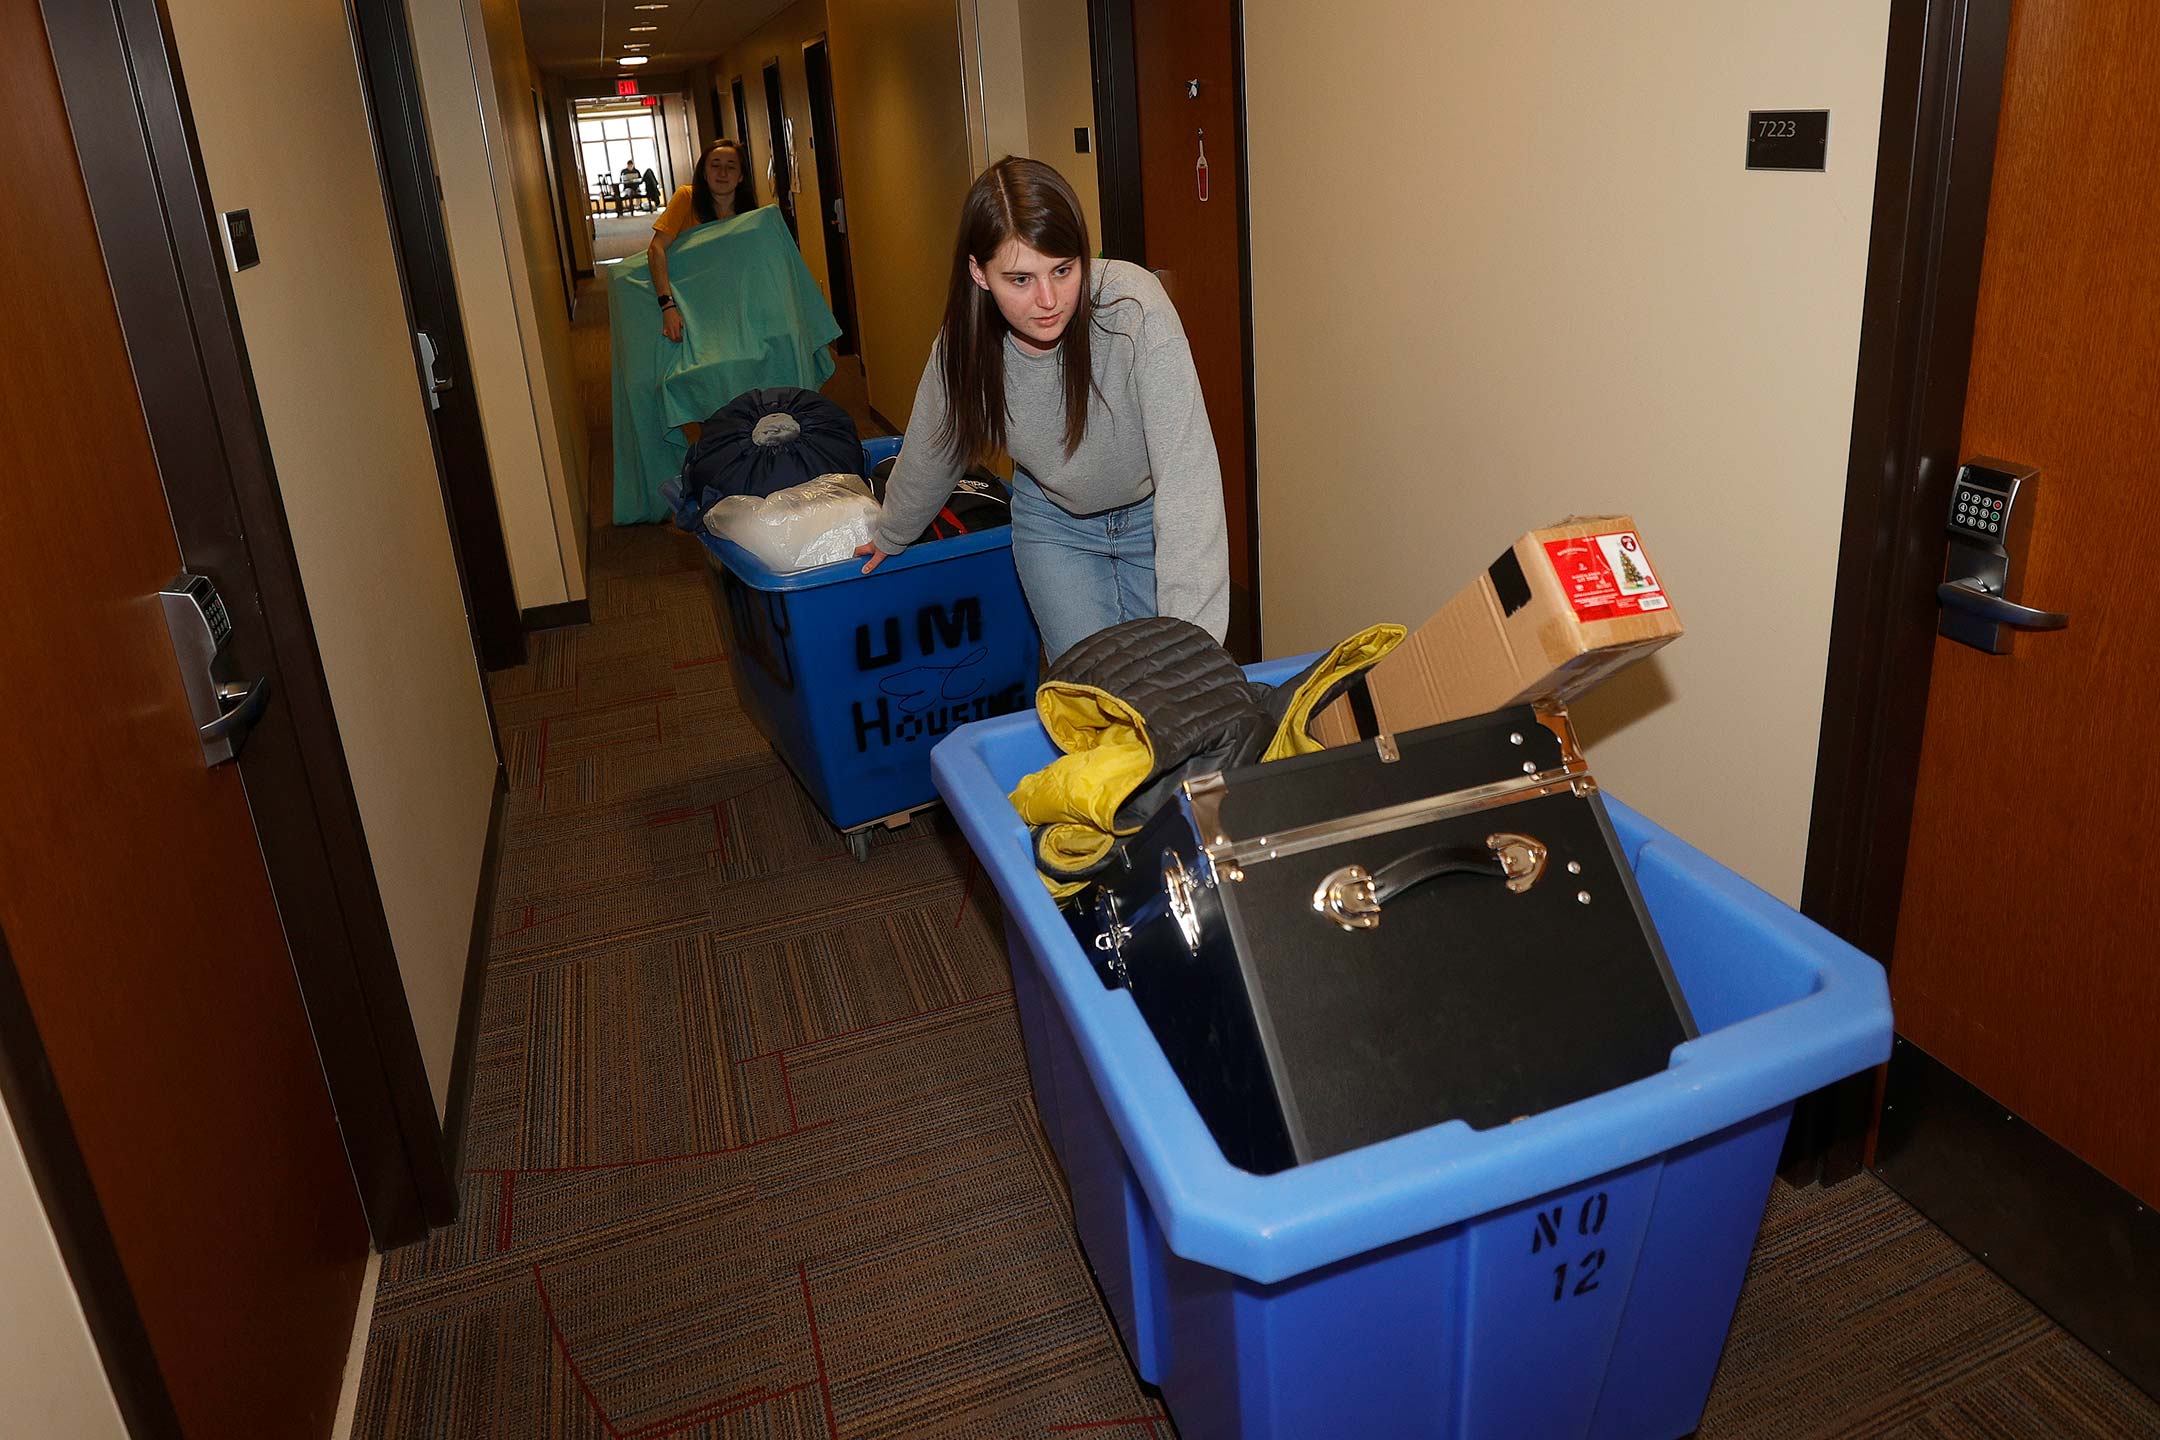 A female college student pushes a cart full of her belongings as she moves out of her dorm